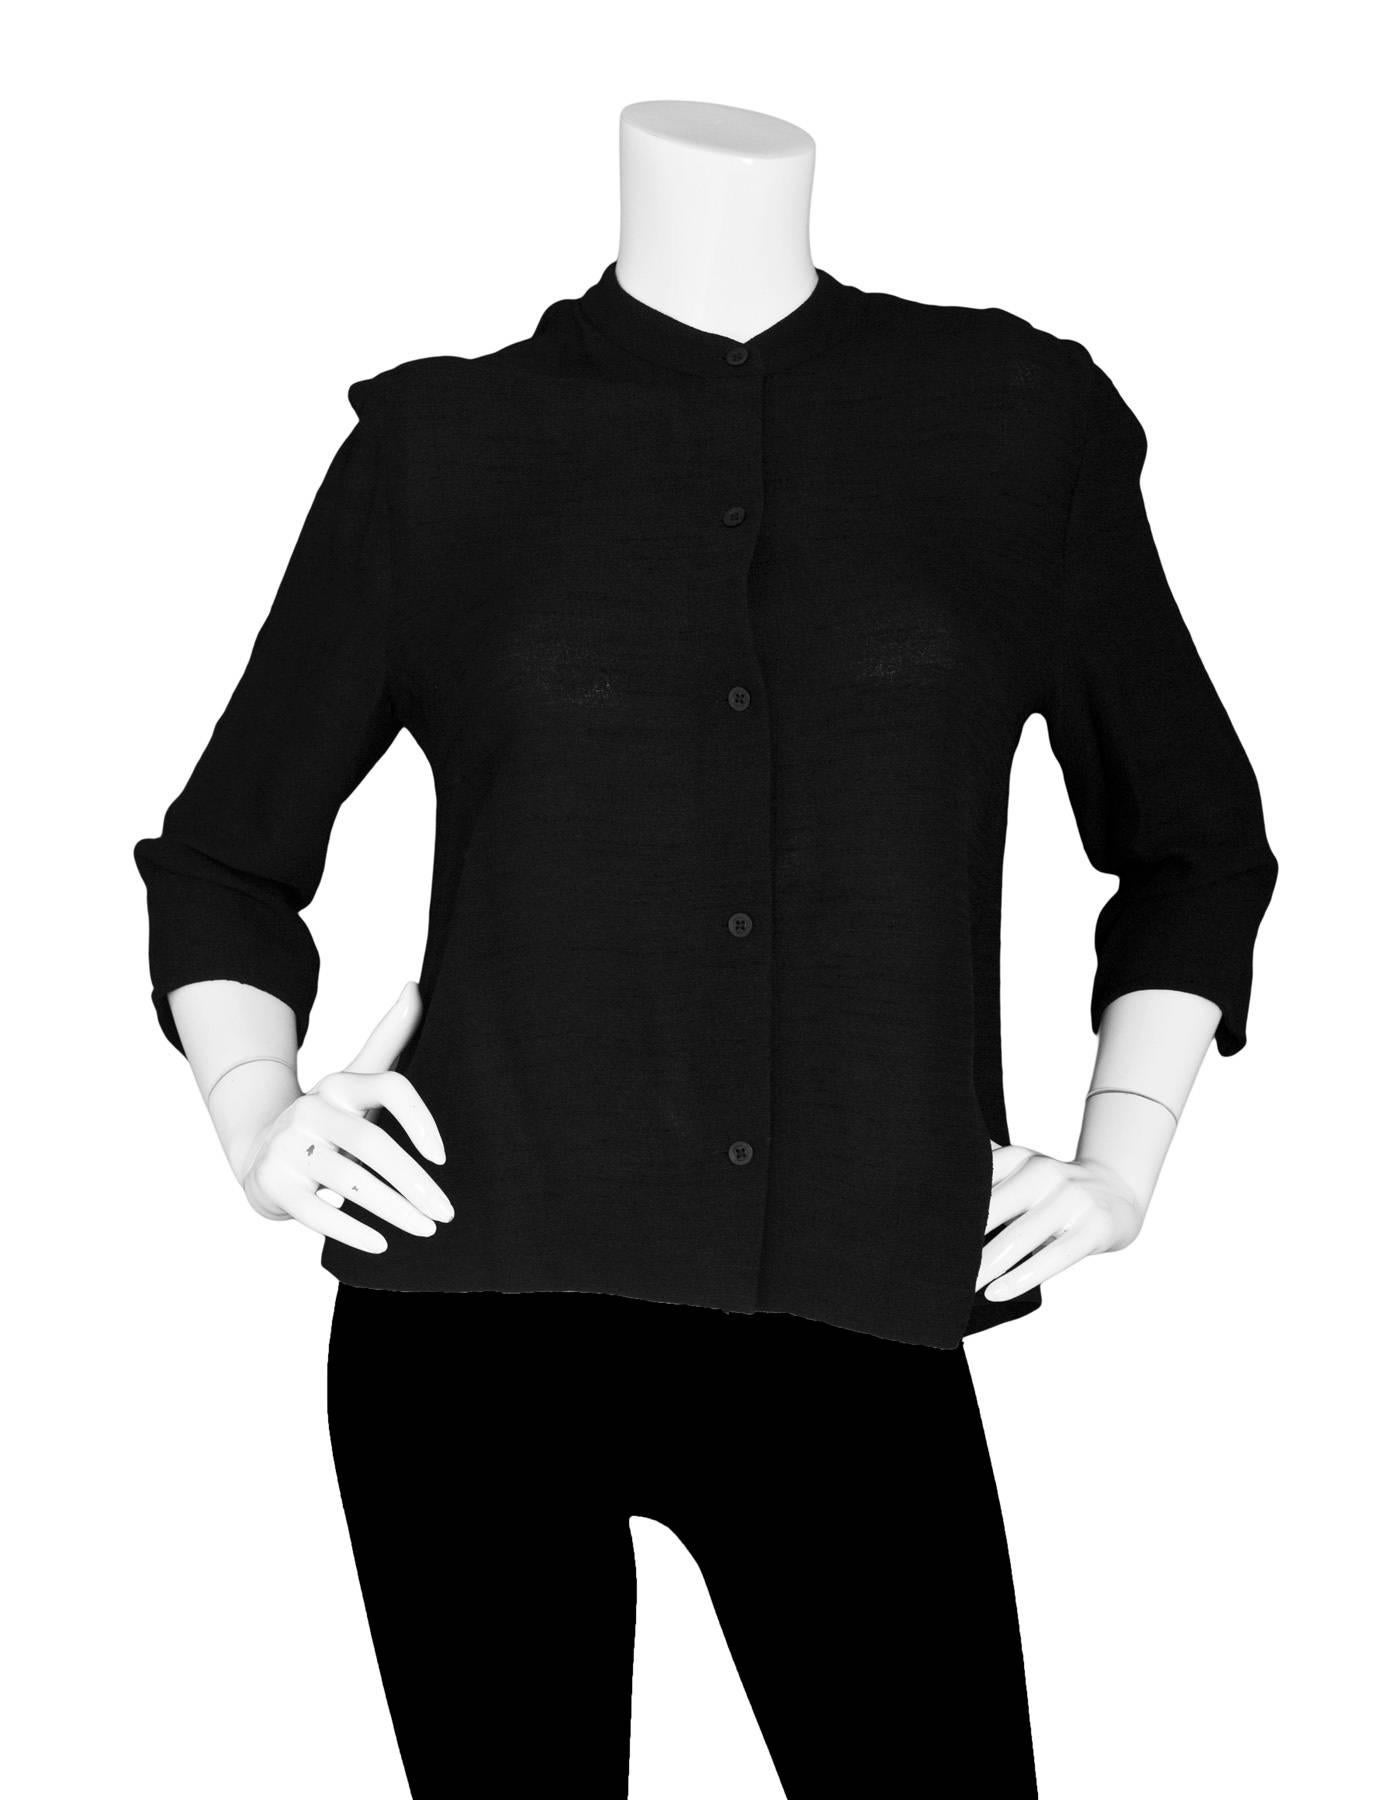 Emporio Armani Black Top SZ IT44

Made In: Italy
Color: Black
Composition: Not listed, feels like nylon blend
Lining: None
Closure/Opening: Front button closure
Exterior Pockets: None
Interior Pockets: None
Overall Condition: Excellent pre-owned